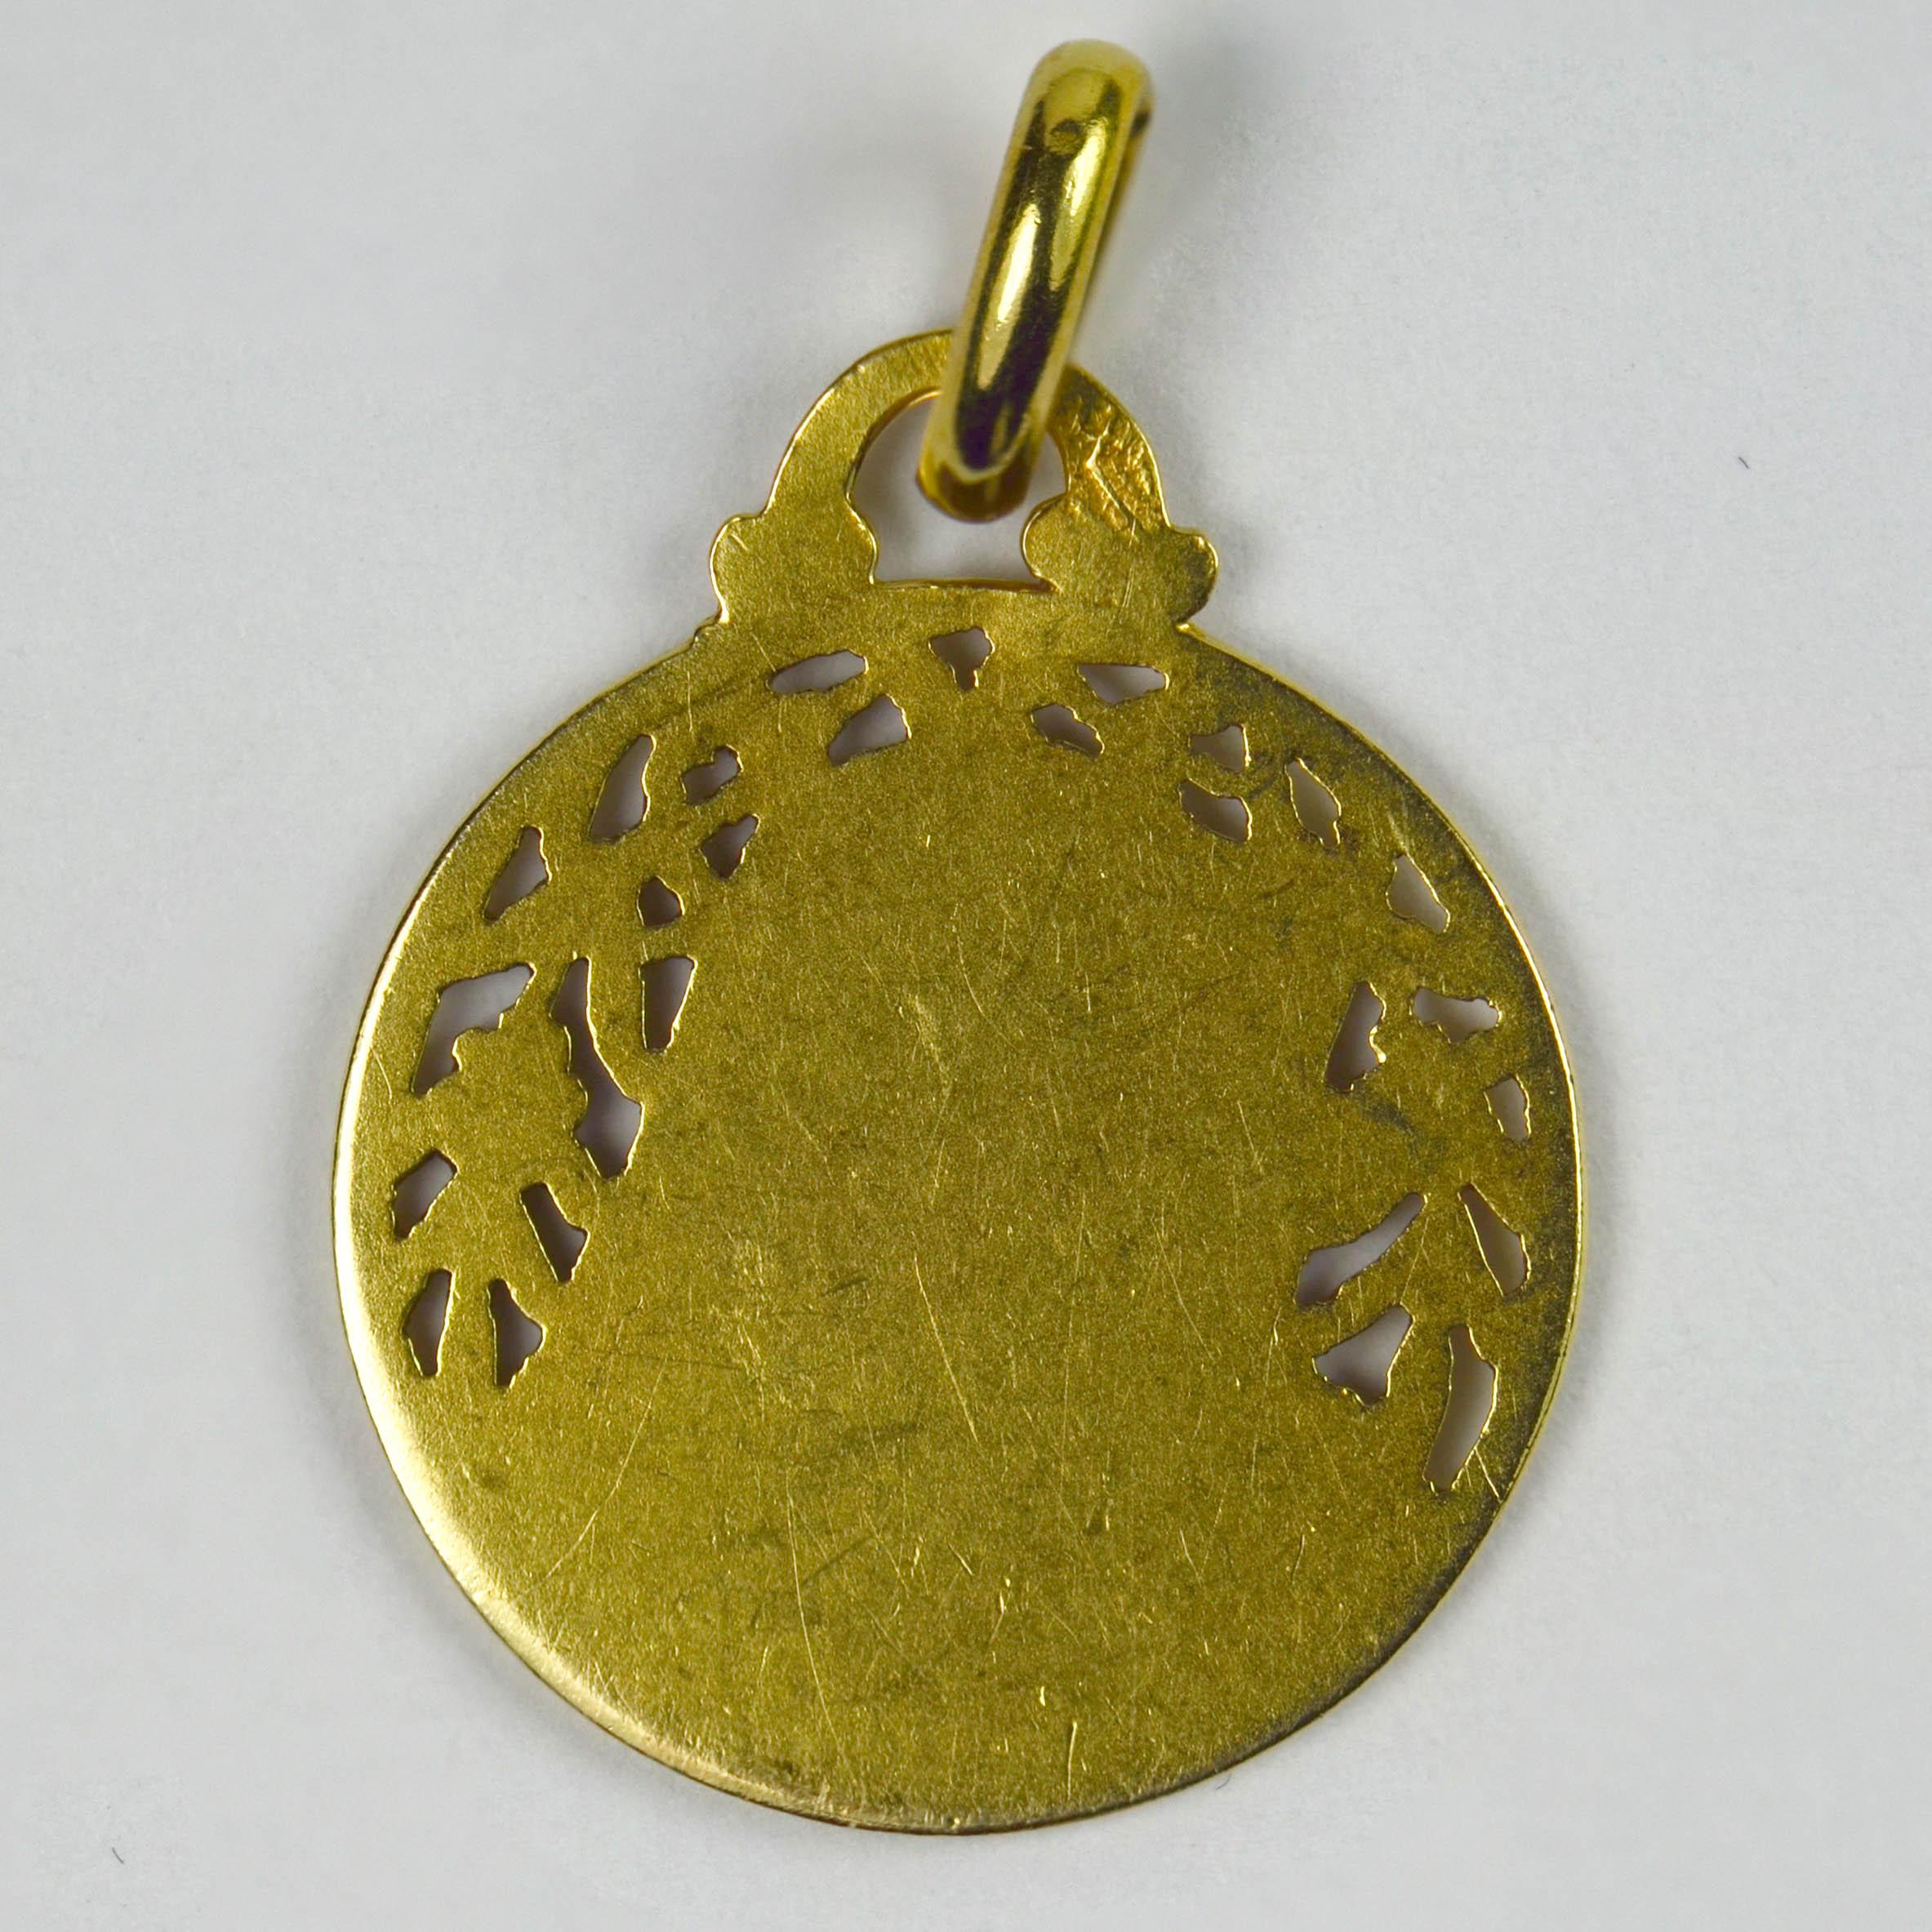 A French 18 karat (18K) yellow gold charm pendant designed as a pierced and engraved medal depicting the Virgin Mary against a field of flowers and leaves. Stamped with the eagle's head for 18 karat gold and French manufacture.

Dimensions: 2.5 x